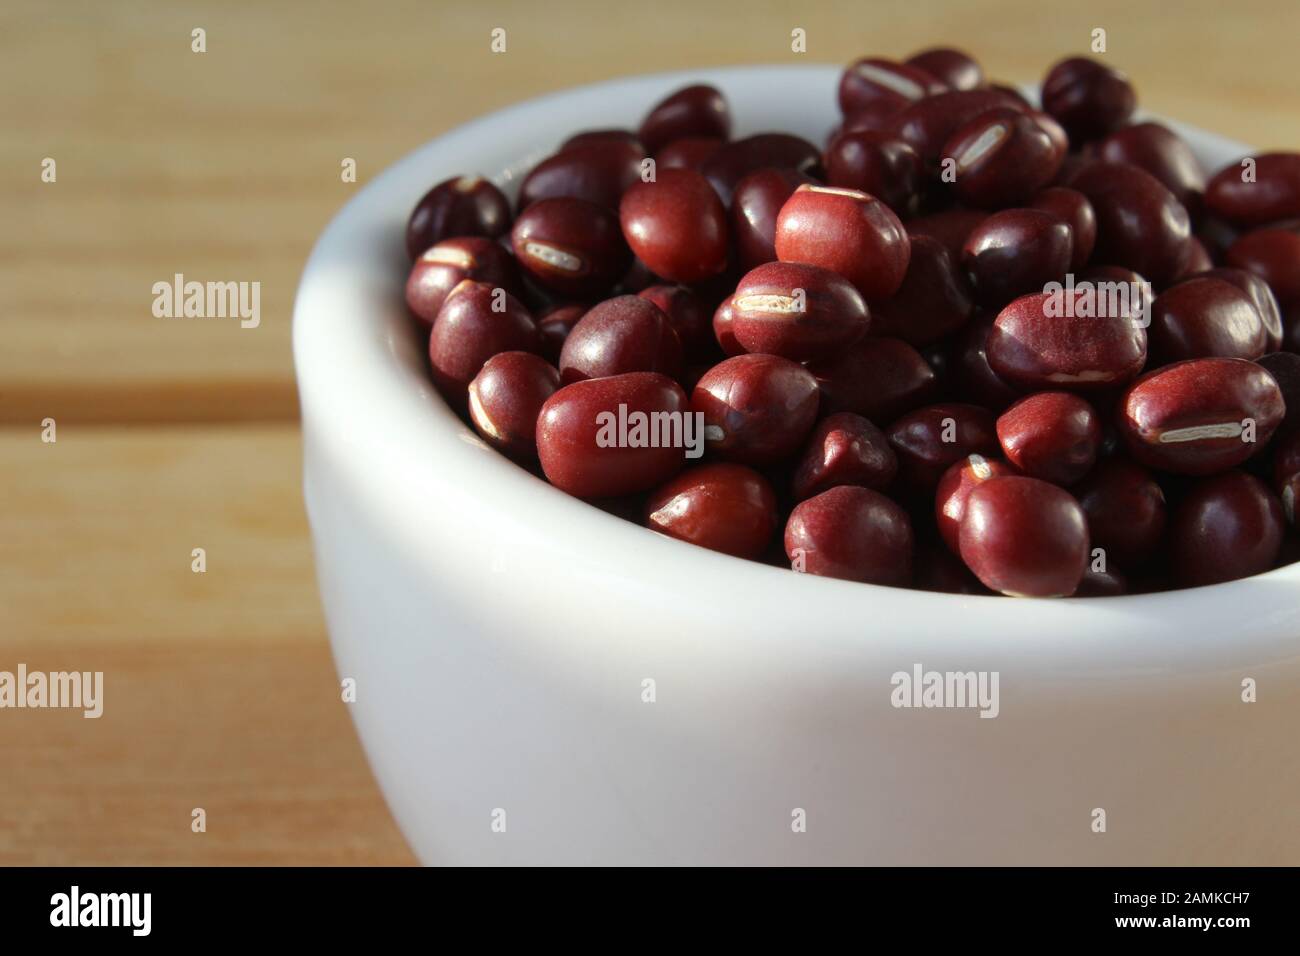 A plain sunlit white bowl of Adzuki beans, also known as red mung bean, in close up, on a plain wooden table. With copyspace. Stock Photo